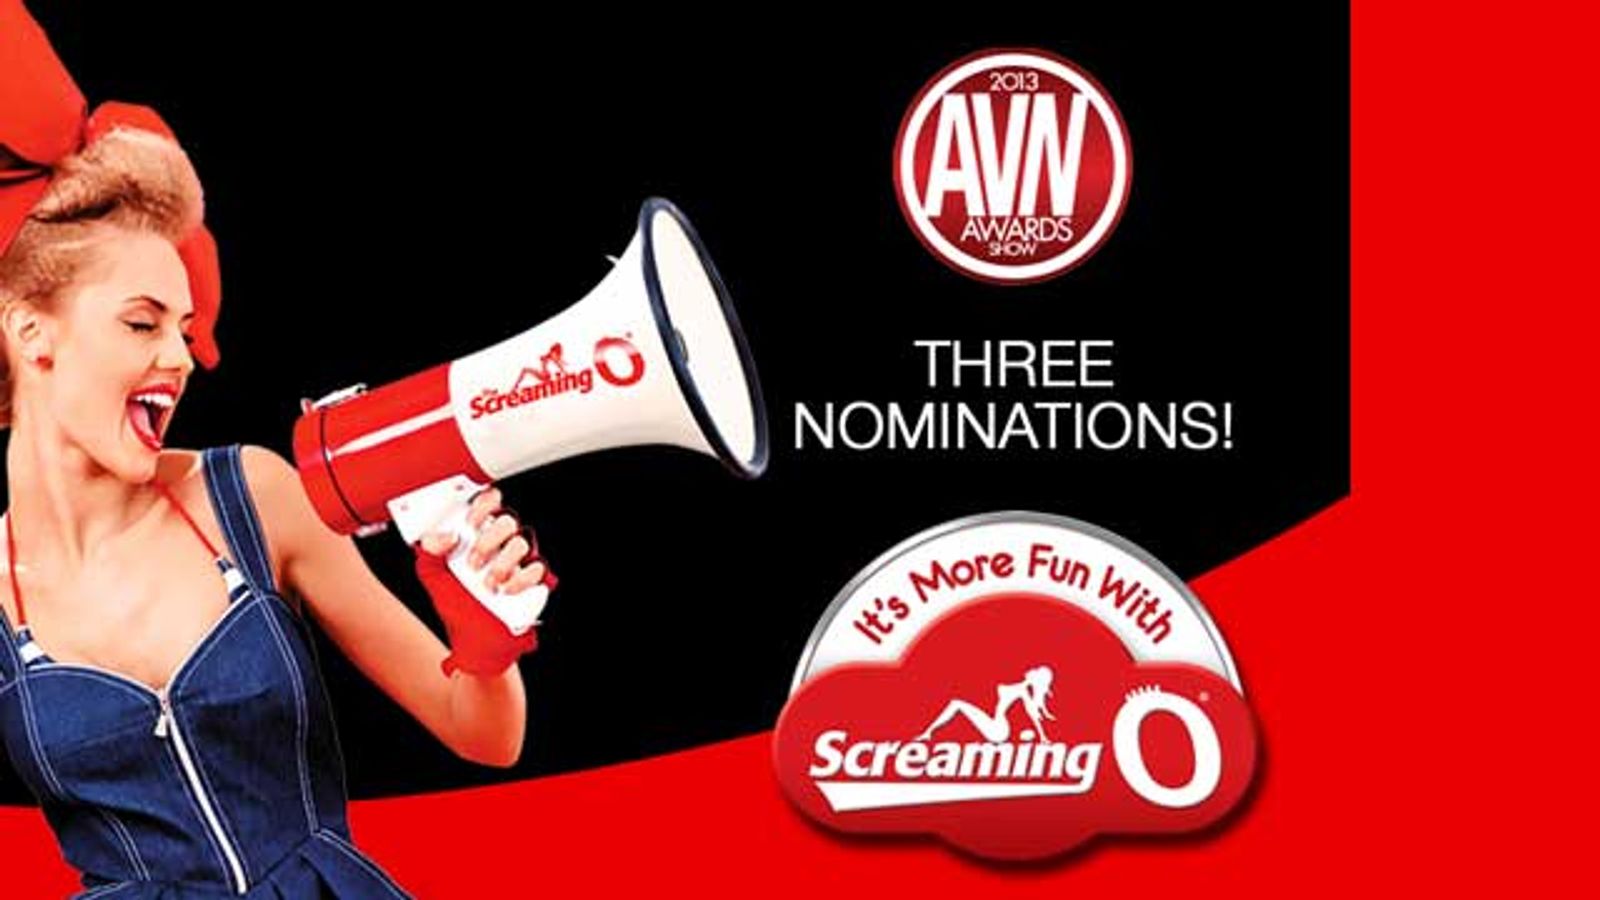 The Screaming O Recognized With 3 AVN Awards Nominations